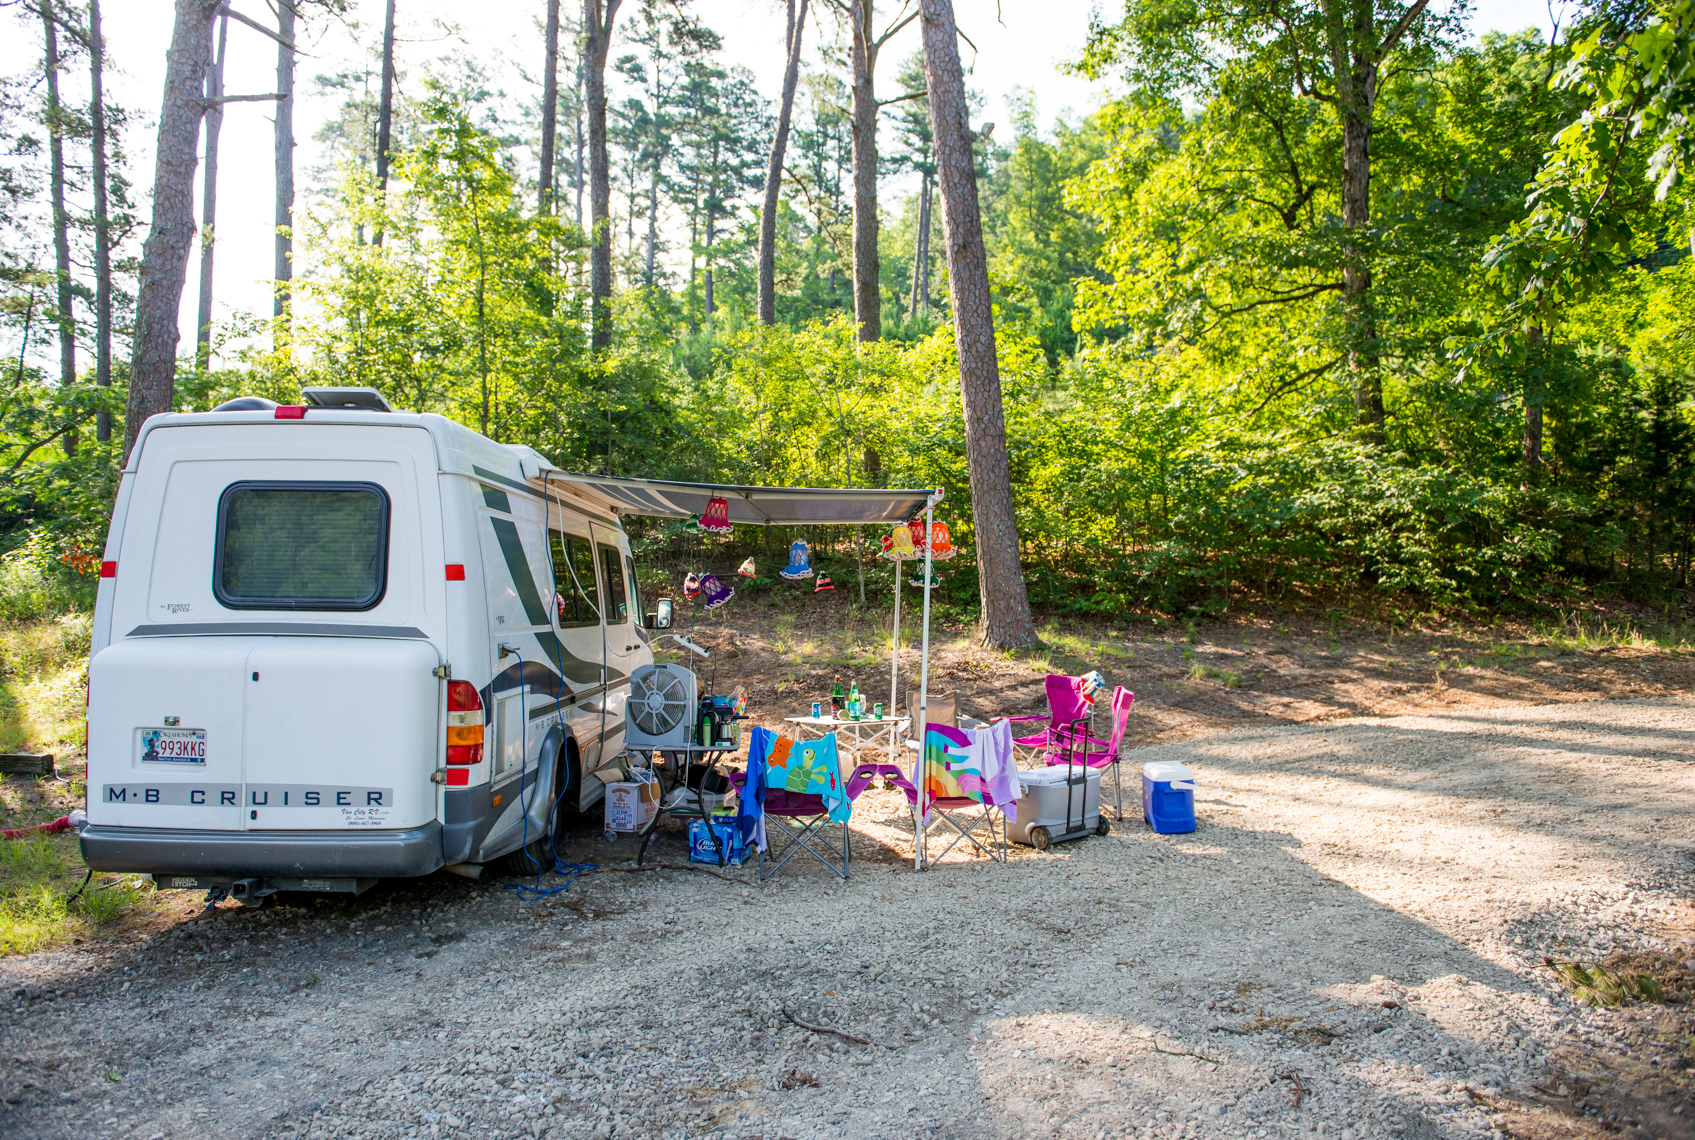 Camper in Little Rock, Arkansas, campground, lifestyle, outdoor, camping, no people, beverage, liquor, beer, lifestyle  photographer